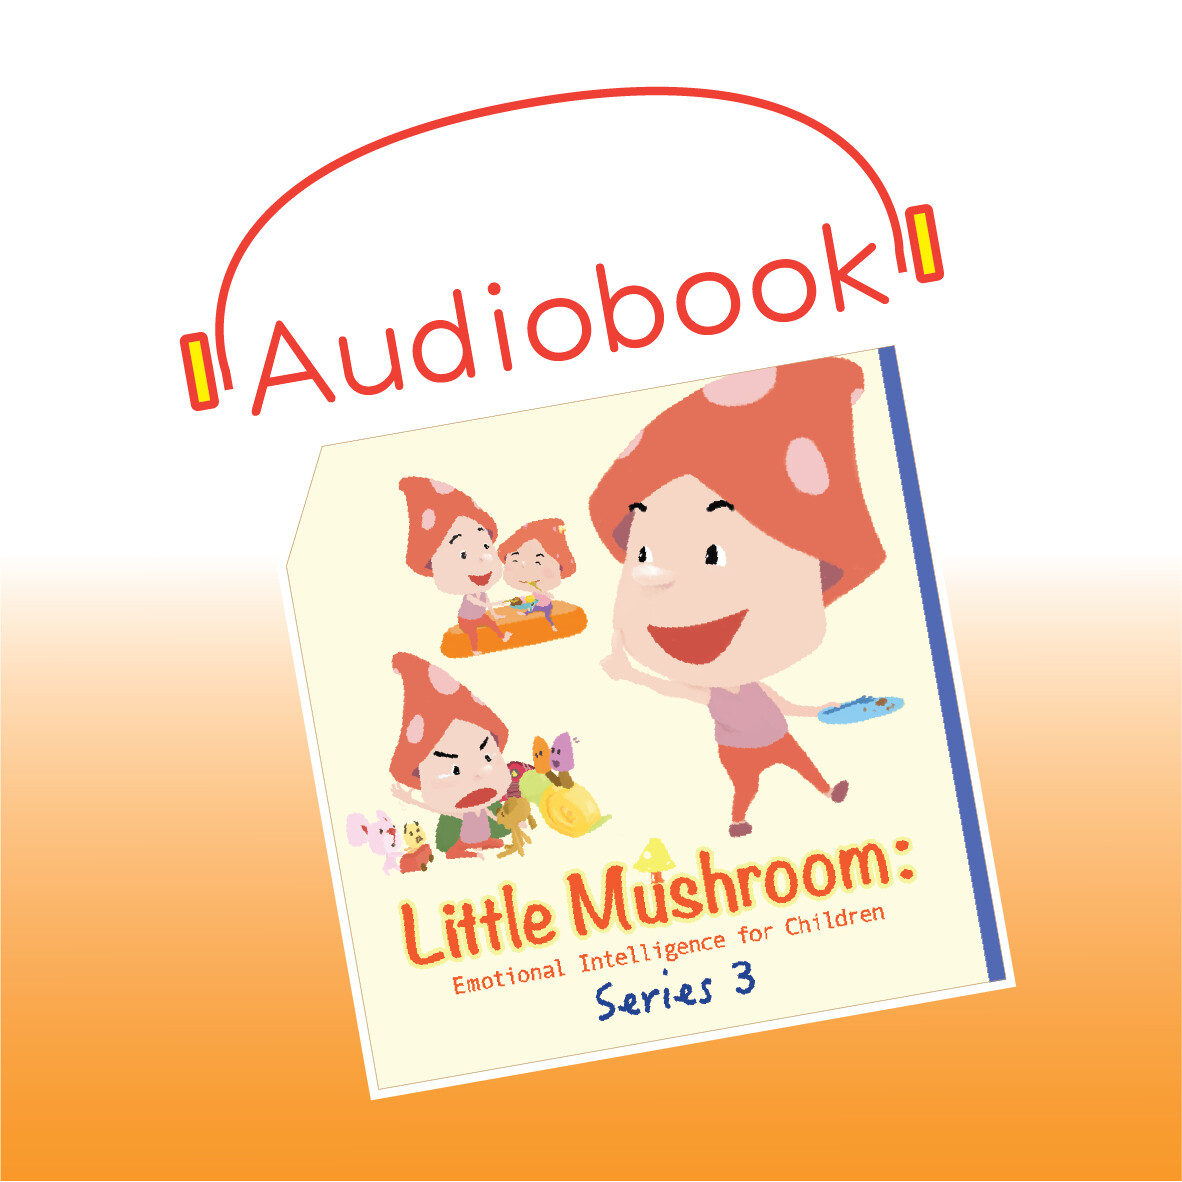 Family Edition. Audiobook - Series 3